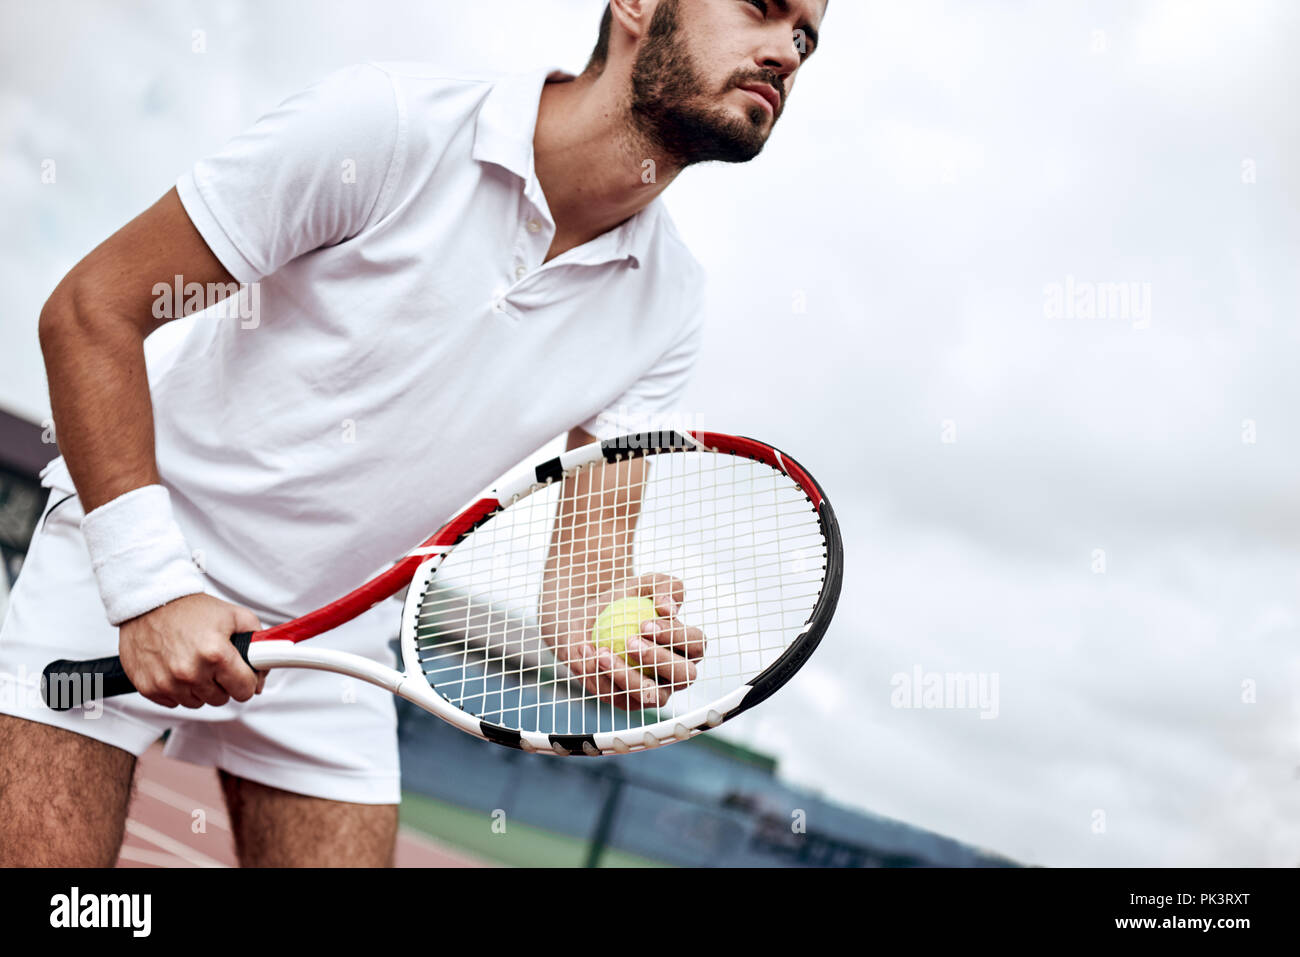 Professional tennis player man athlete waiting to receive ball, playing game on hard court. Fitness person focused behind net ready to return training cardio on outdoor sport activity. Stock Photo